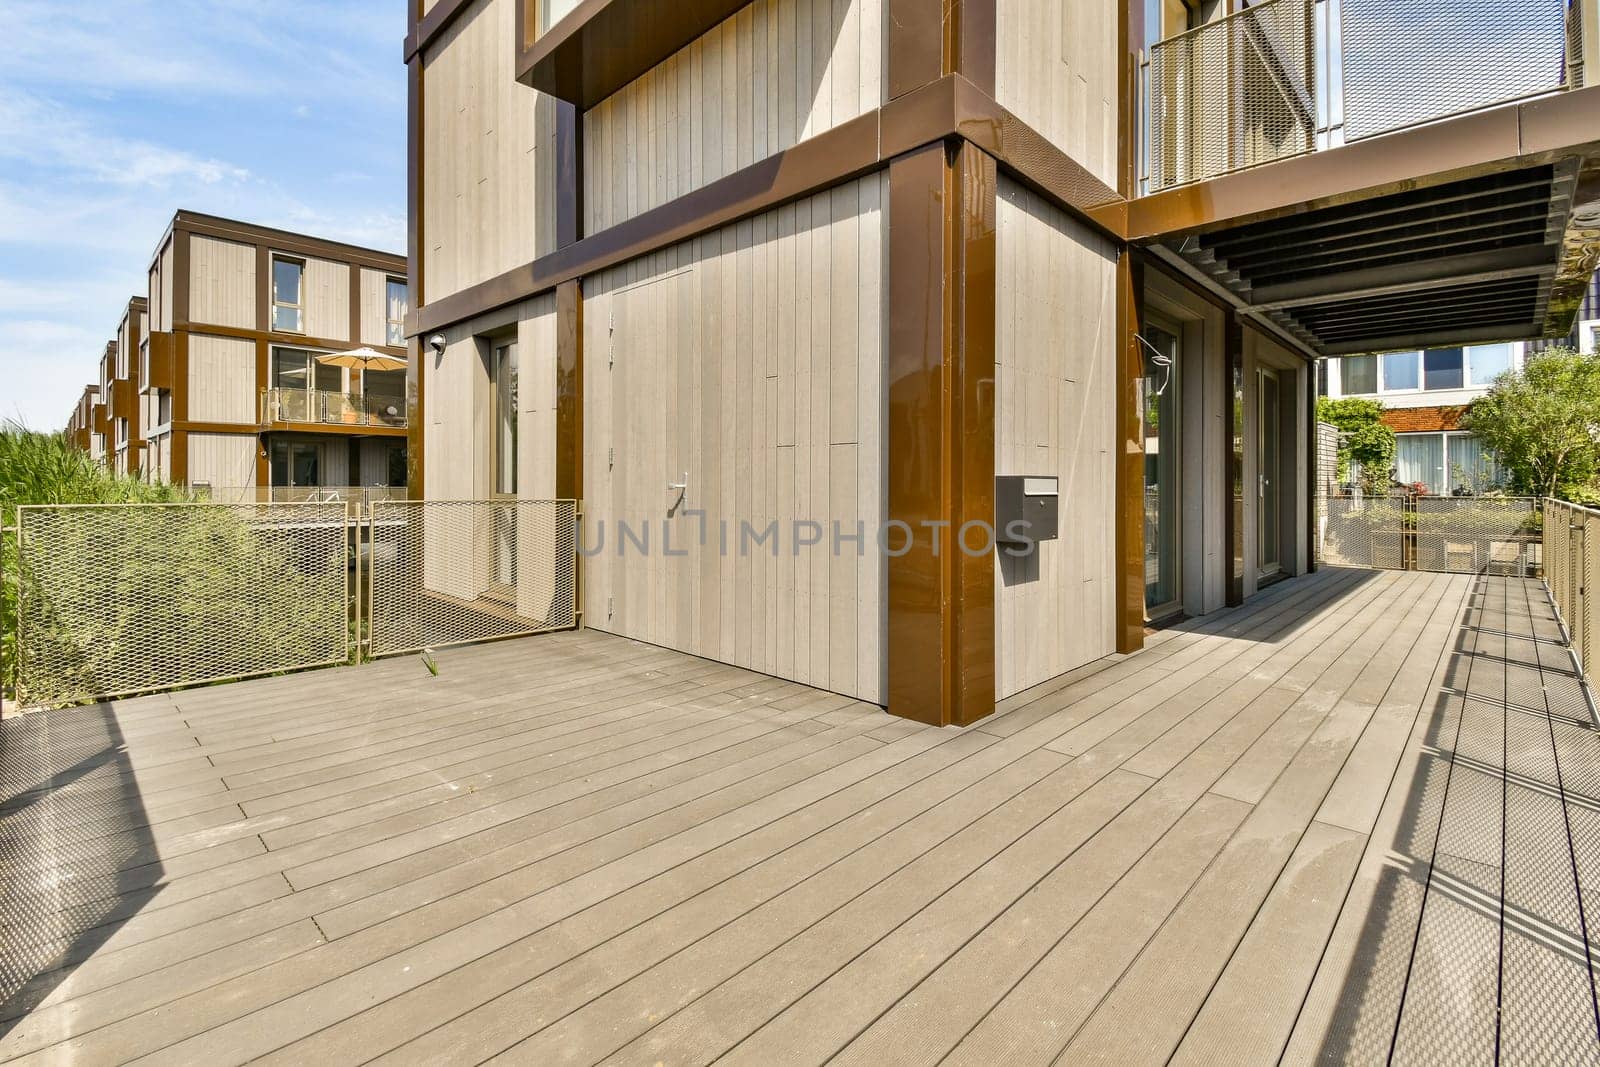 the deck in front of the building is empty by casamedia